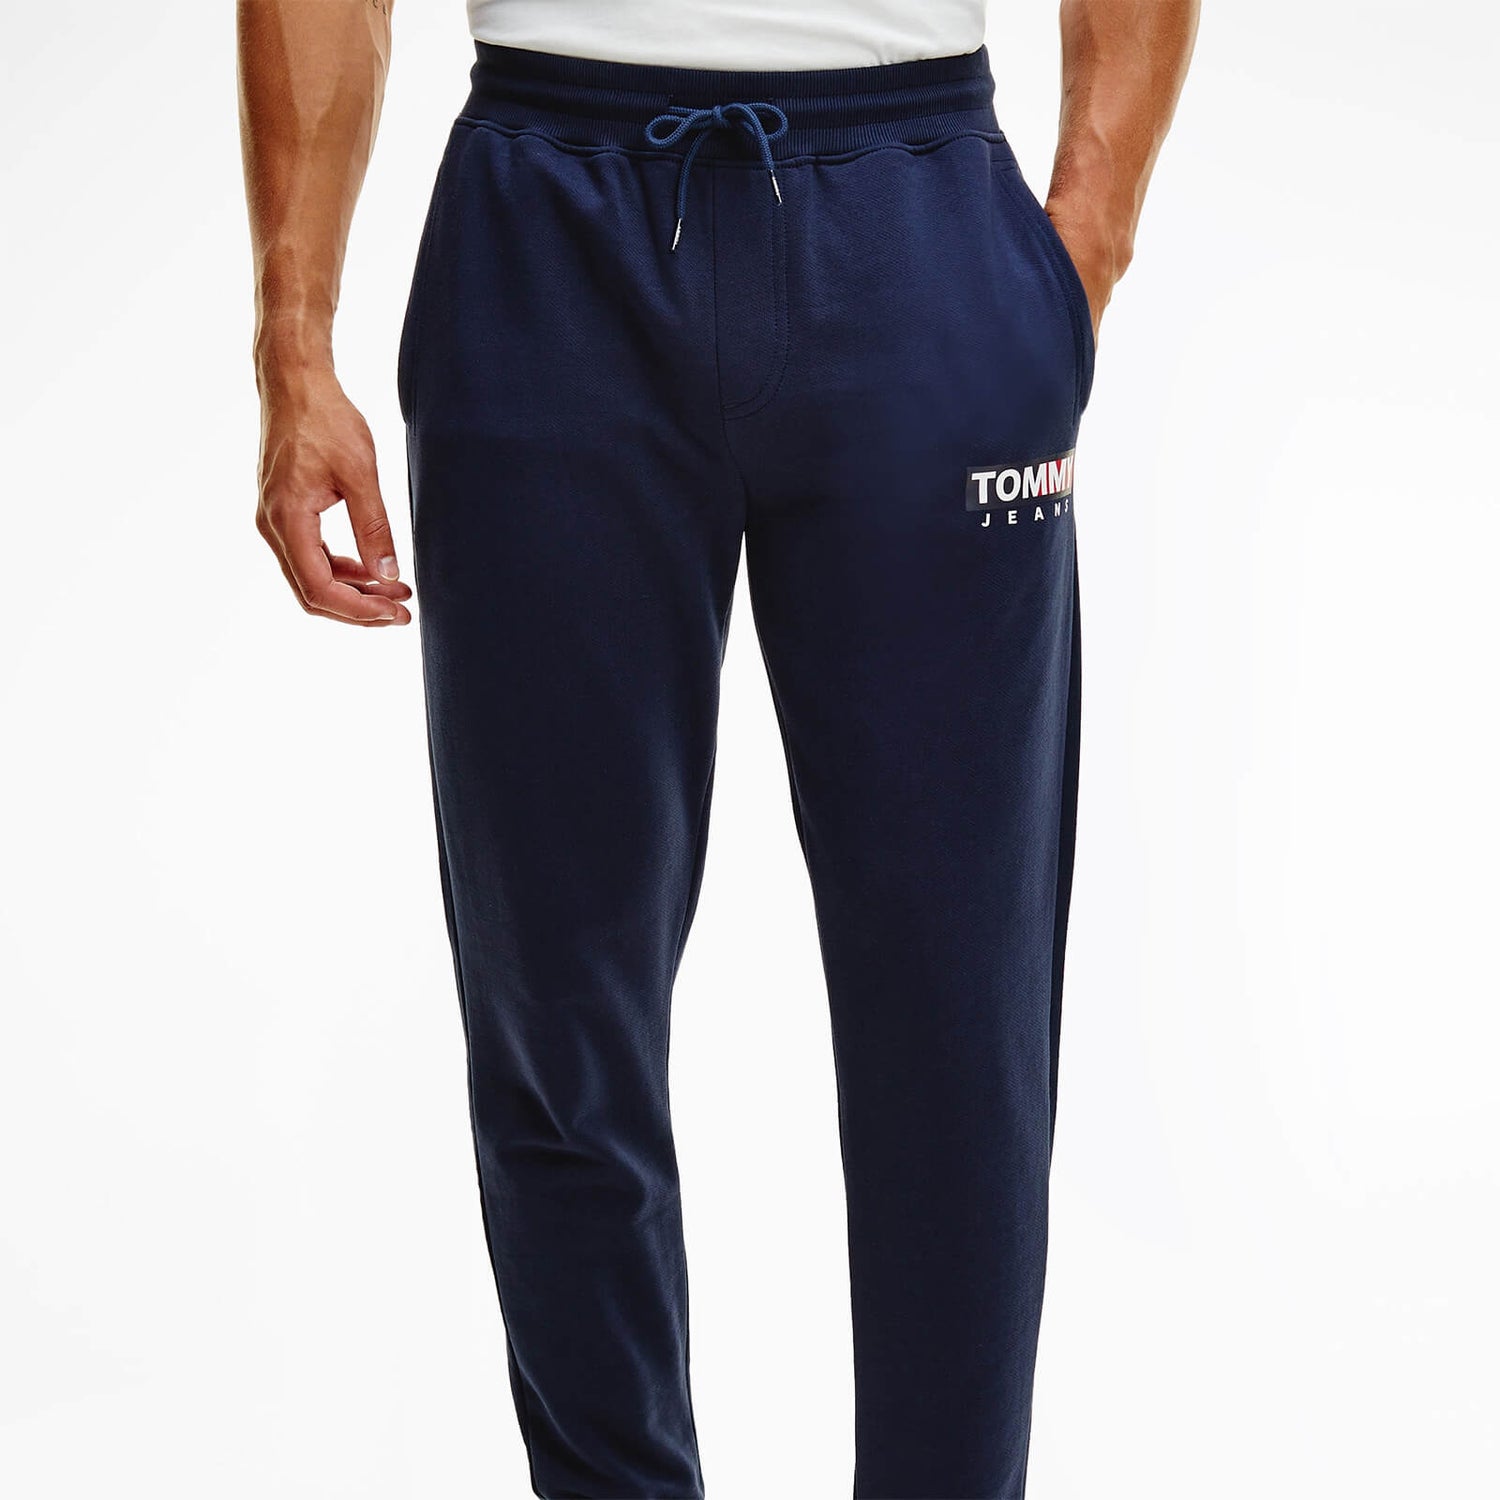 Tommy Jeans Men's Entry Graphic Sweatpants - Twilight Navy - XL